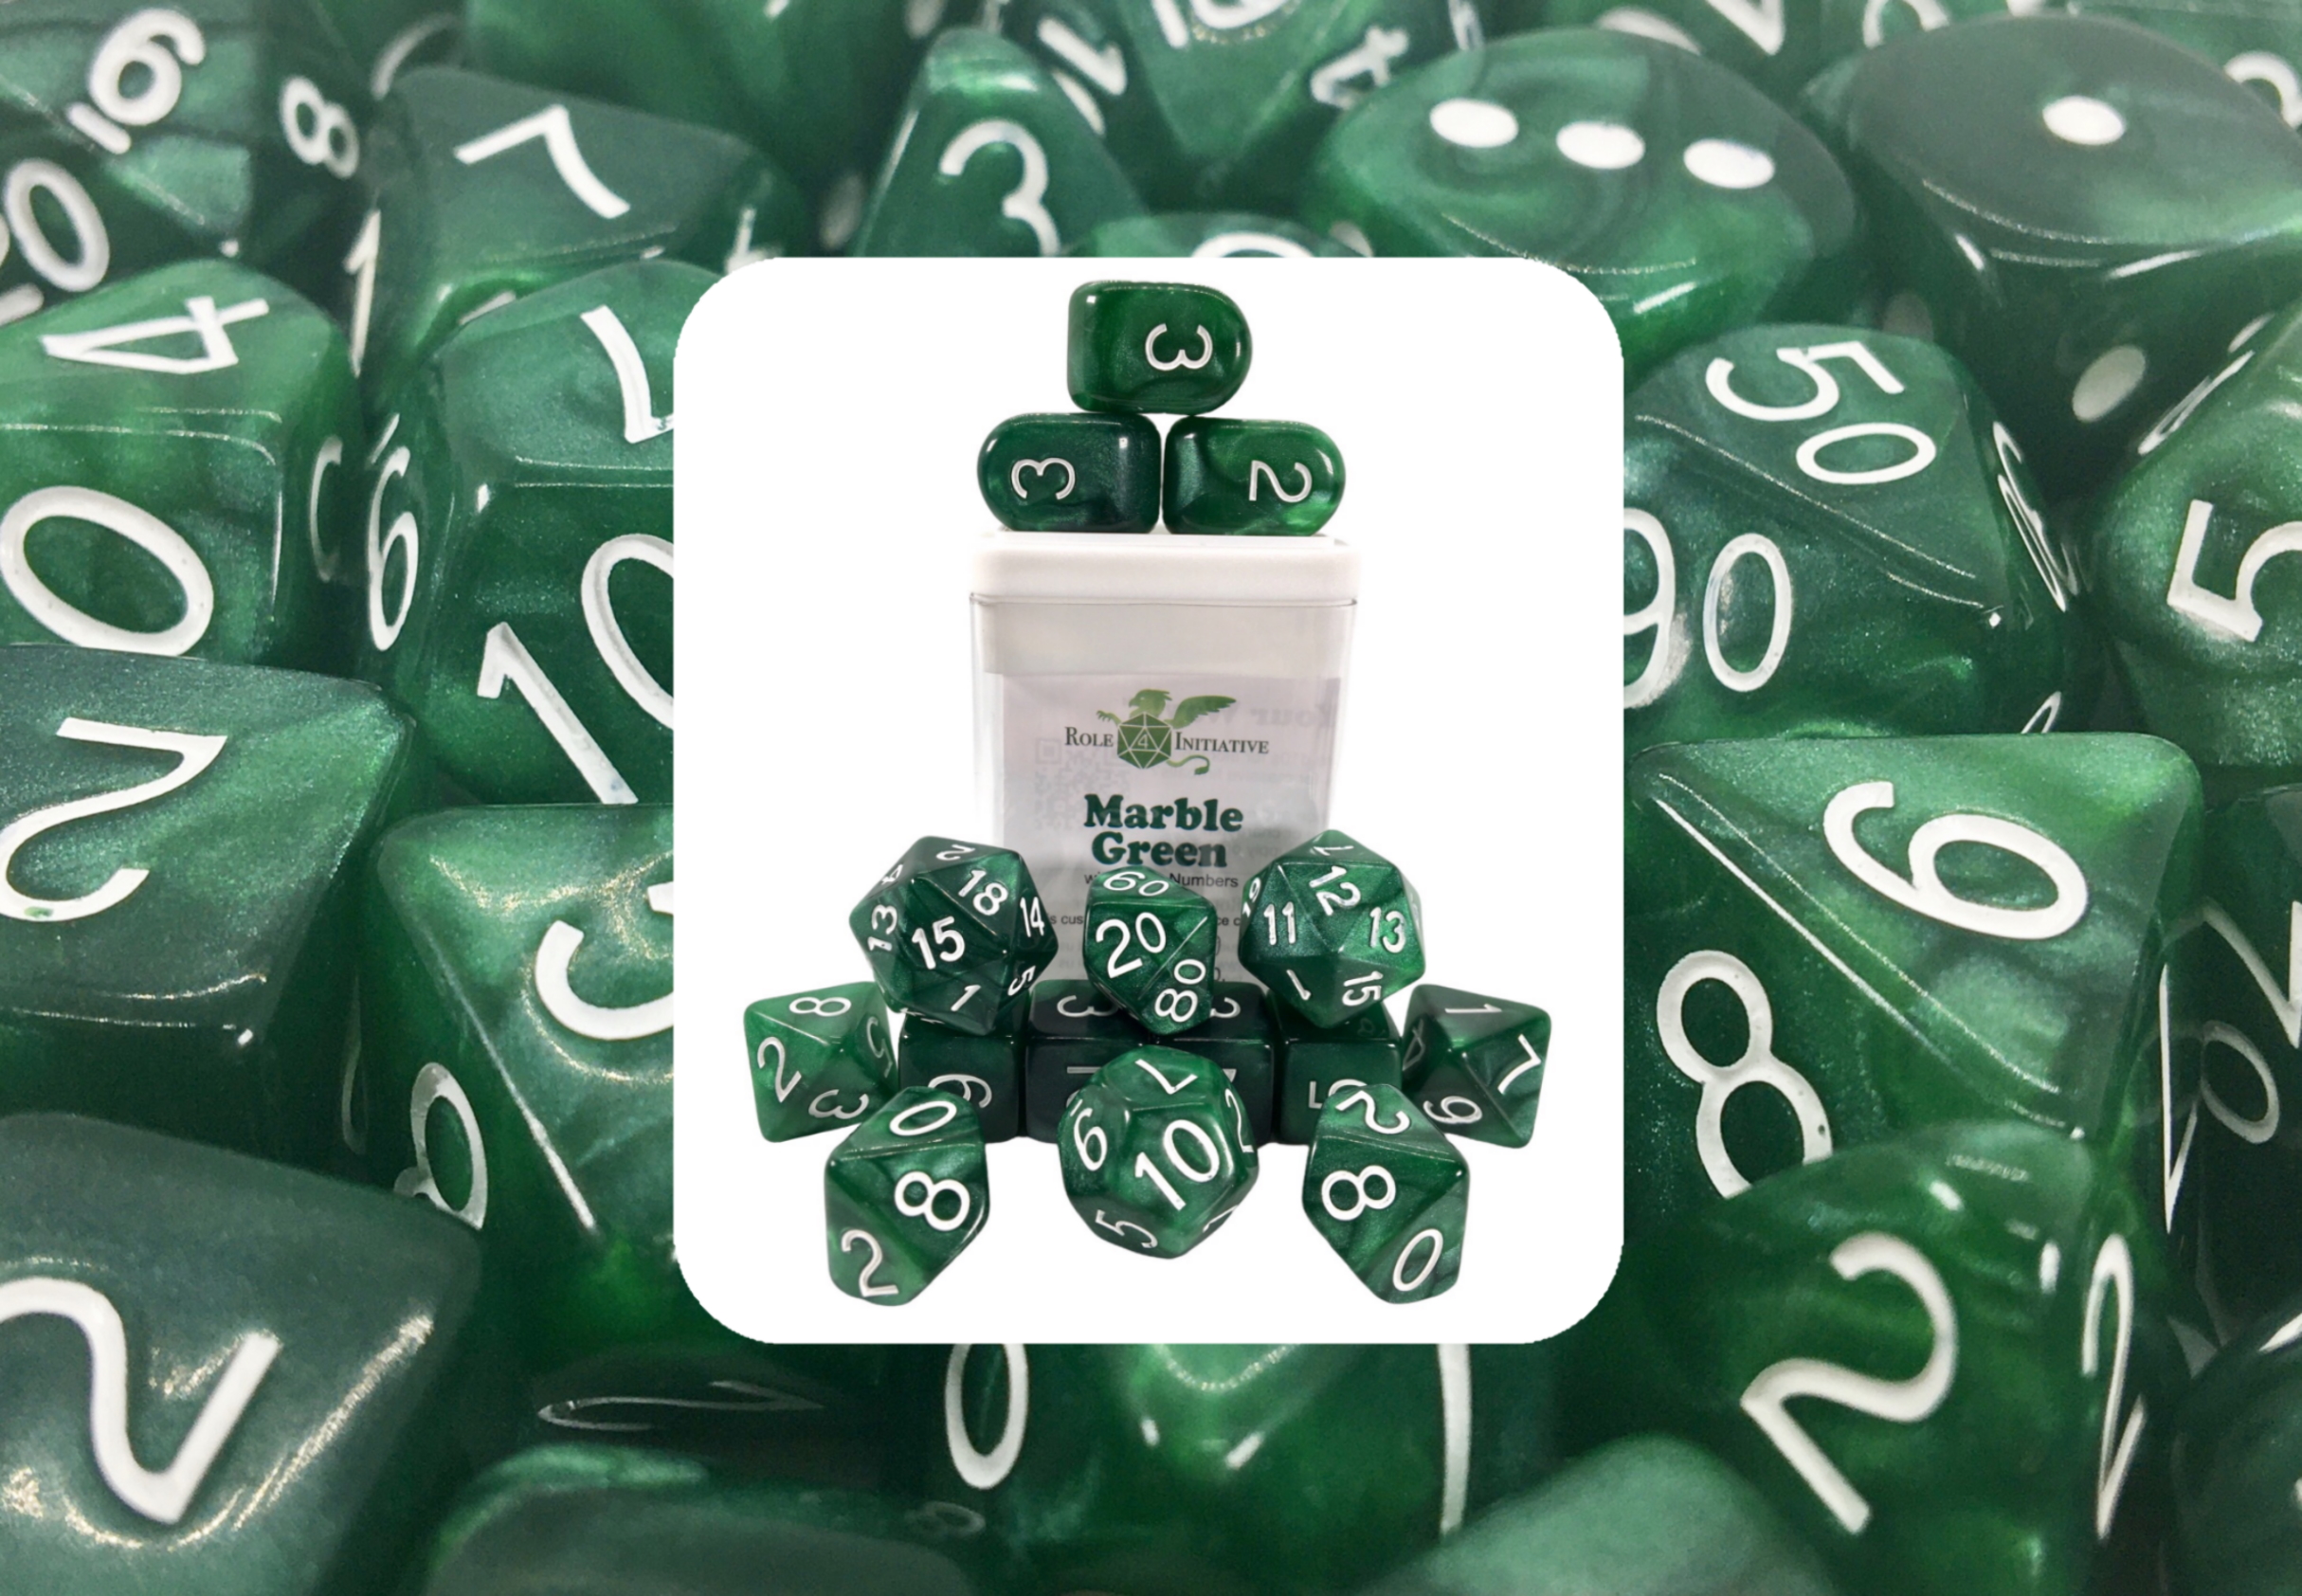 Role 4 Initiative: Polyhedral 15 Dice Set: Marble Green with White (Arch D4) 